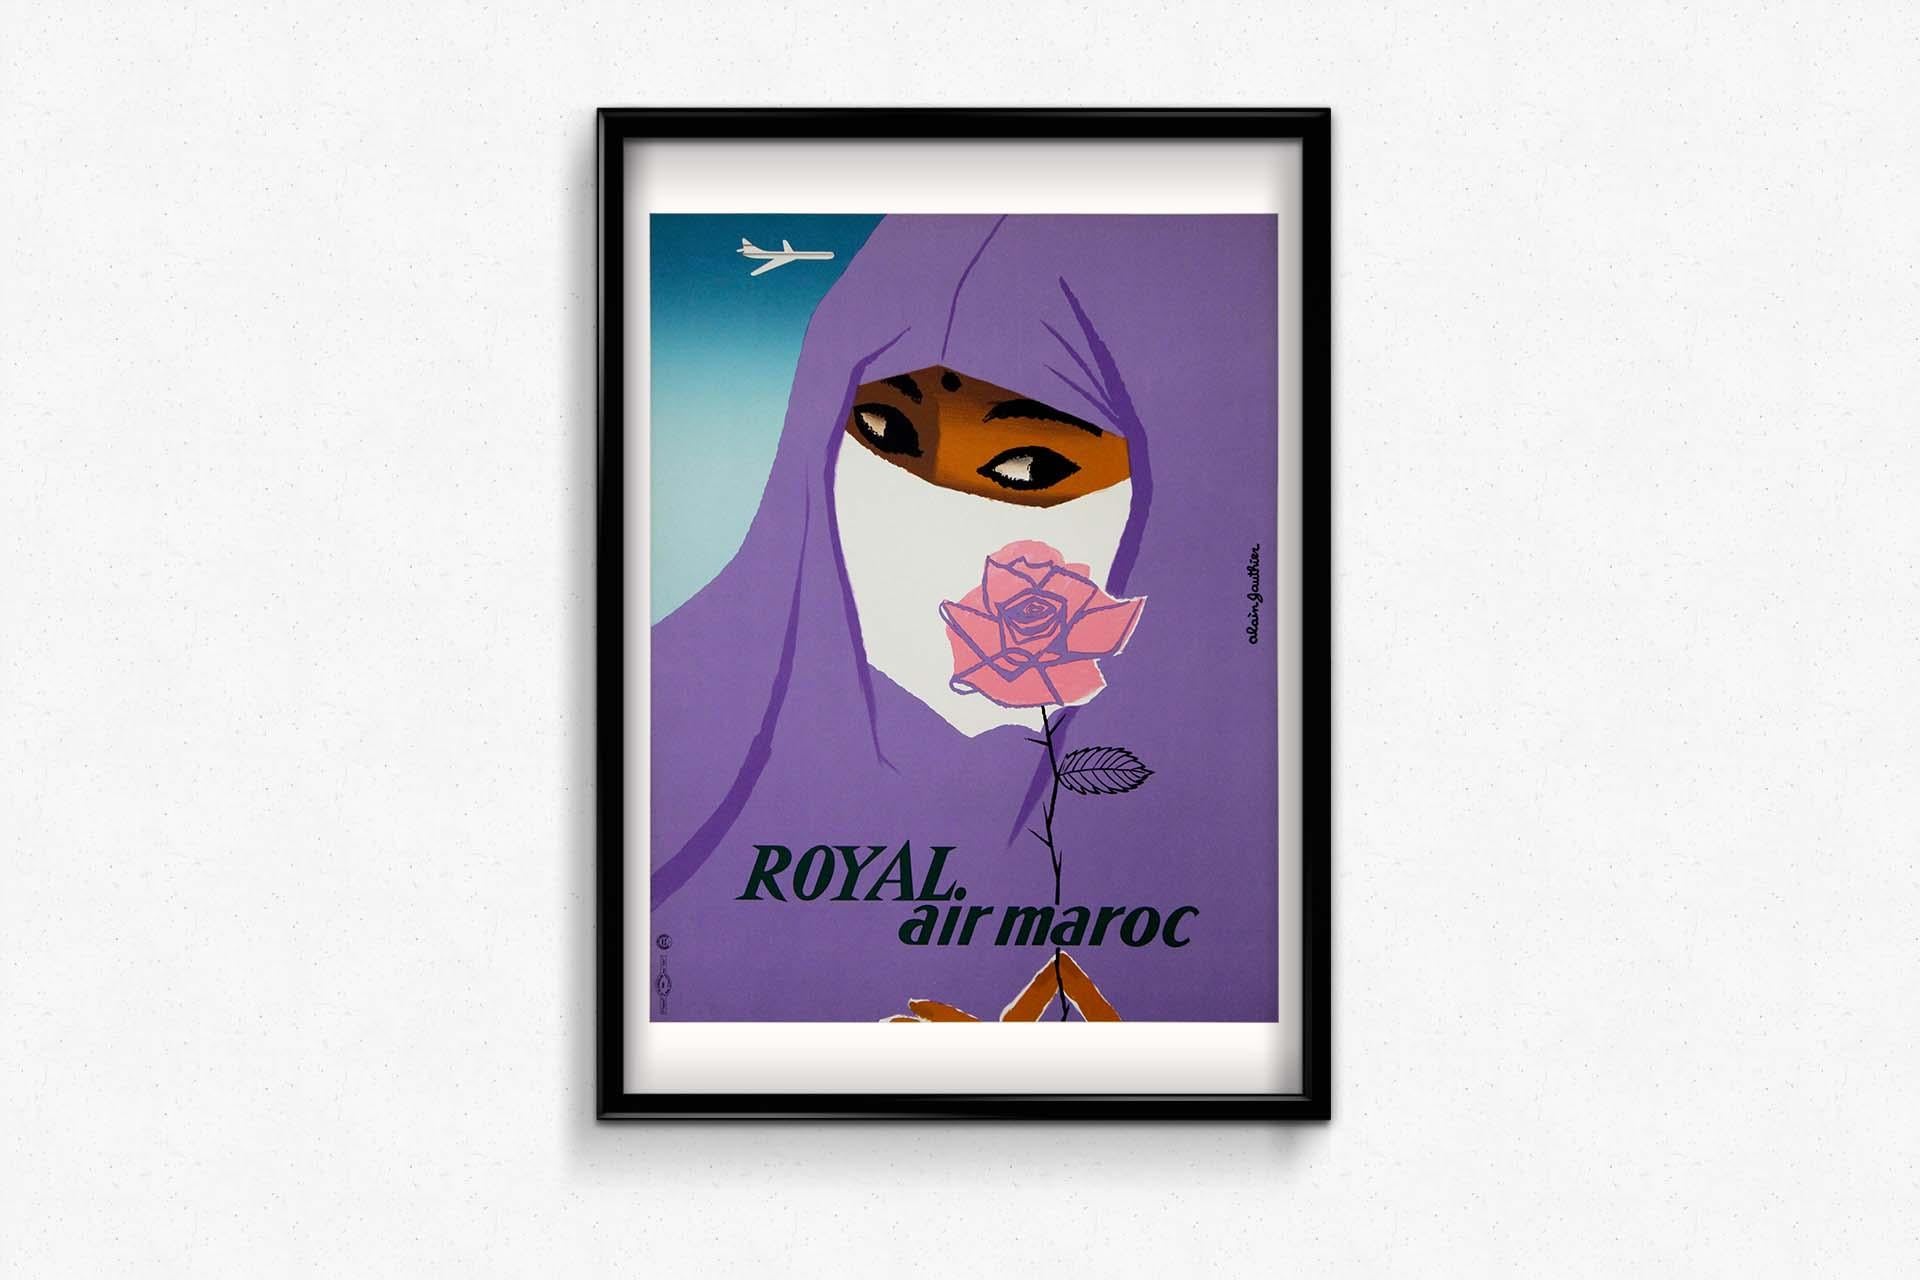 1958 Original Poster by Alain Gauthier Airline  - Royal Air Maroc For Sale 1